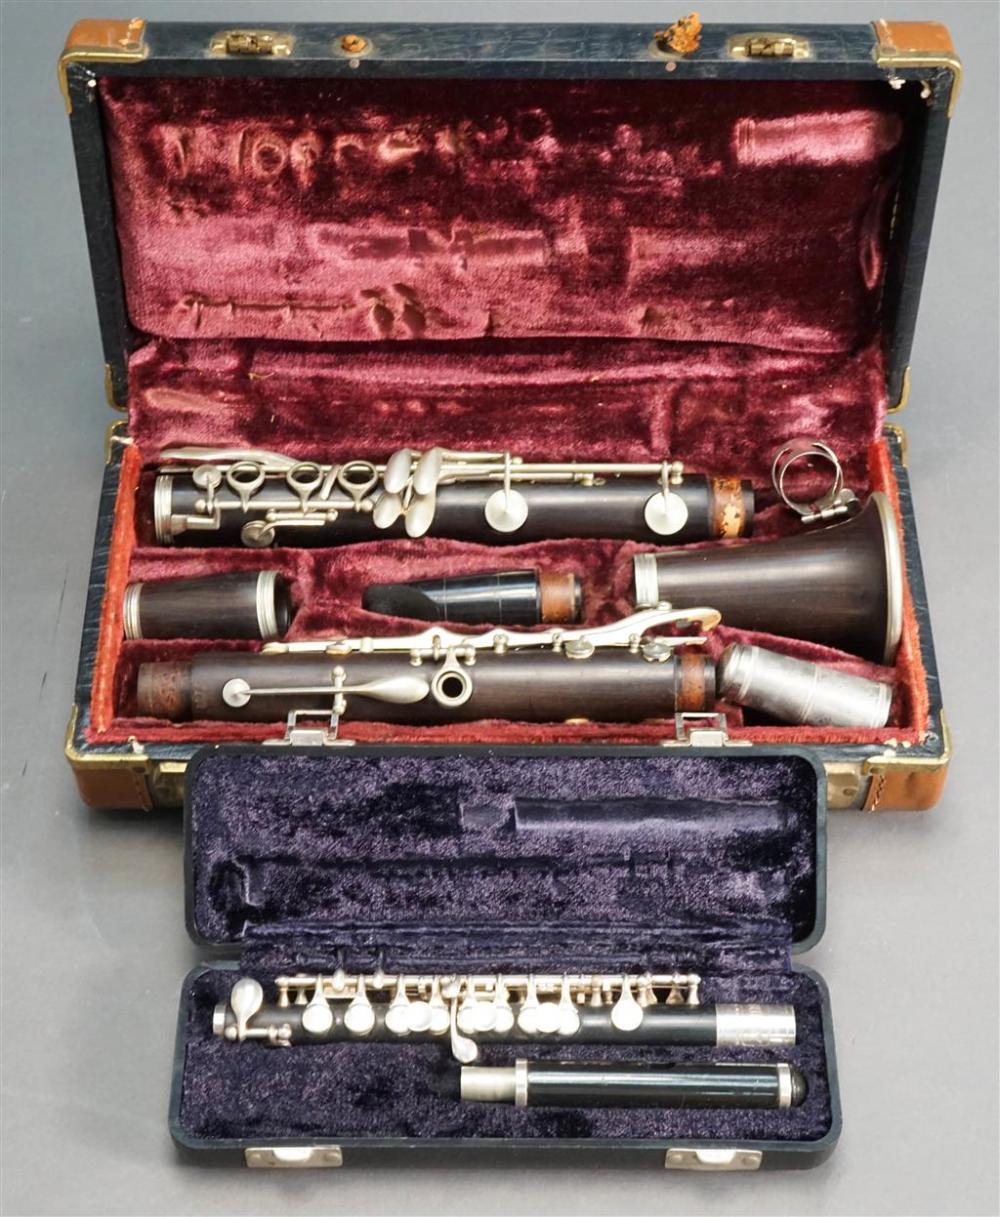 CLARINET AND PICCOLO EACH WITH 32747d